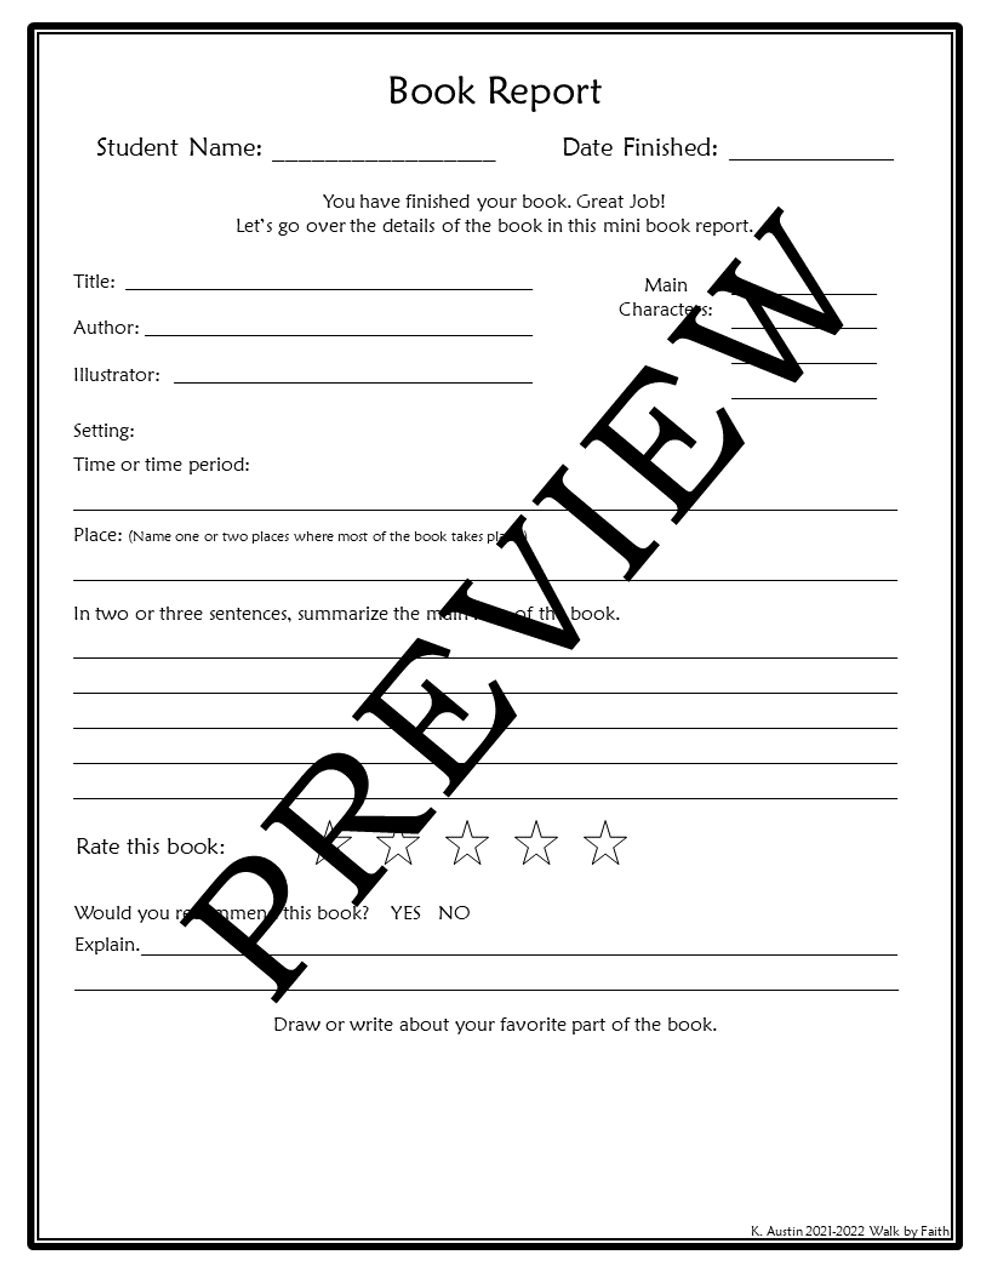 Book Report Forms - FREE